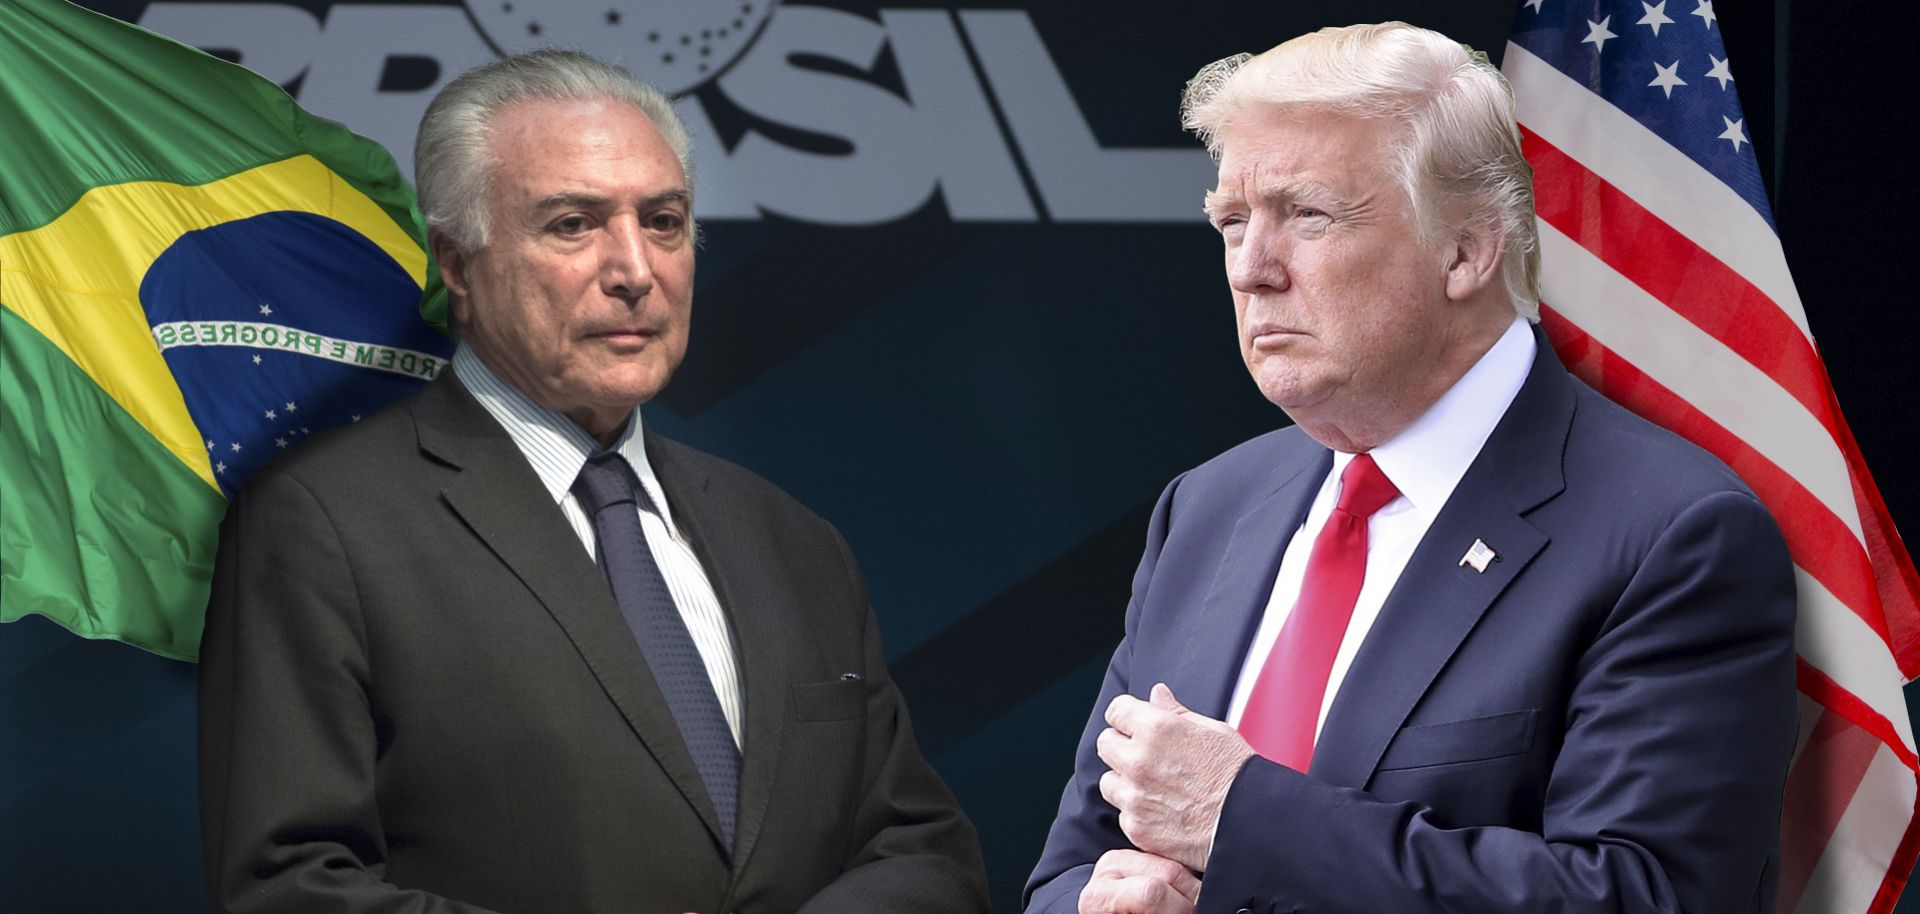 Brazilian President Michel Temer and U.S. President Donald Trump, shown together in a photo illustration.